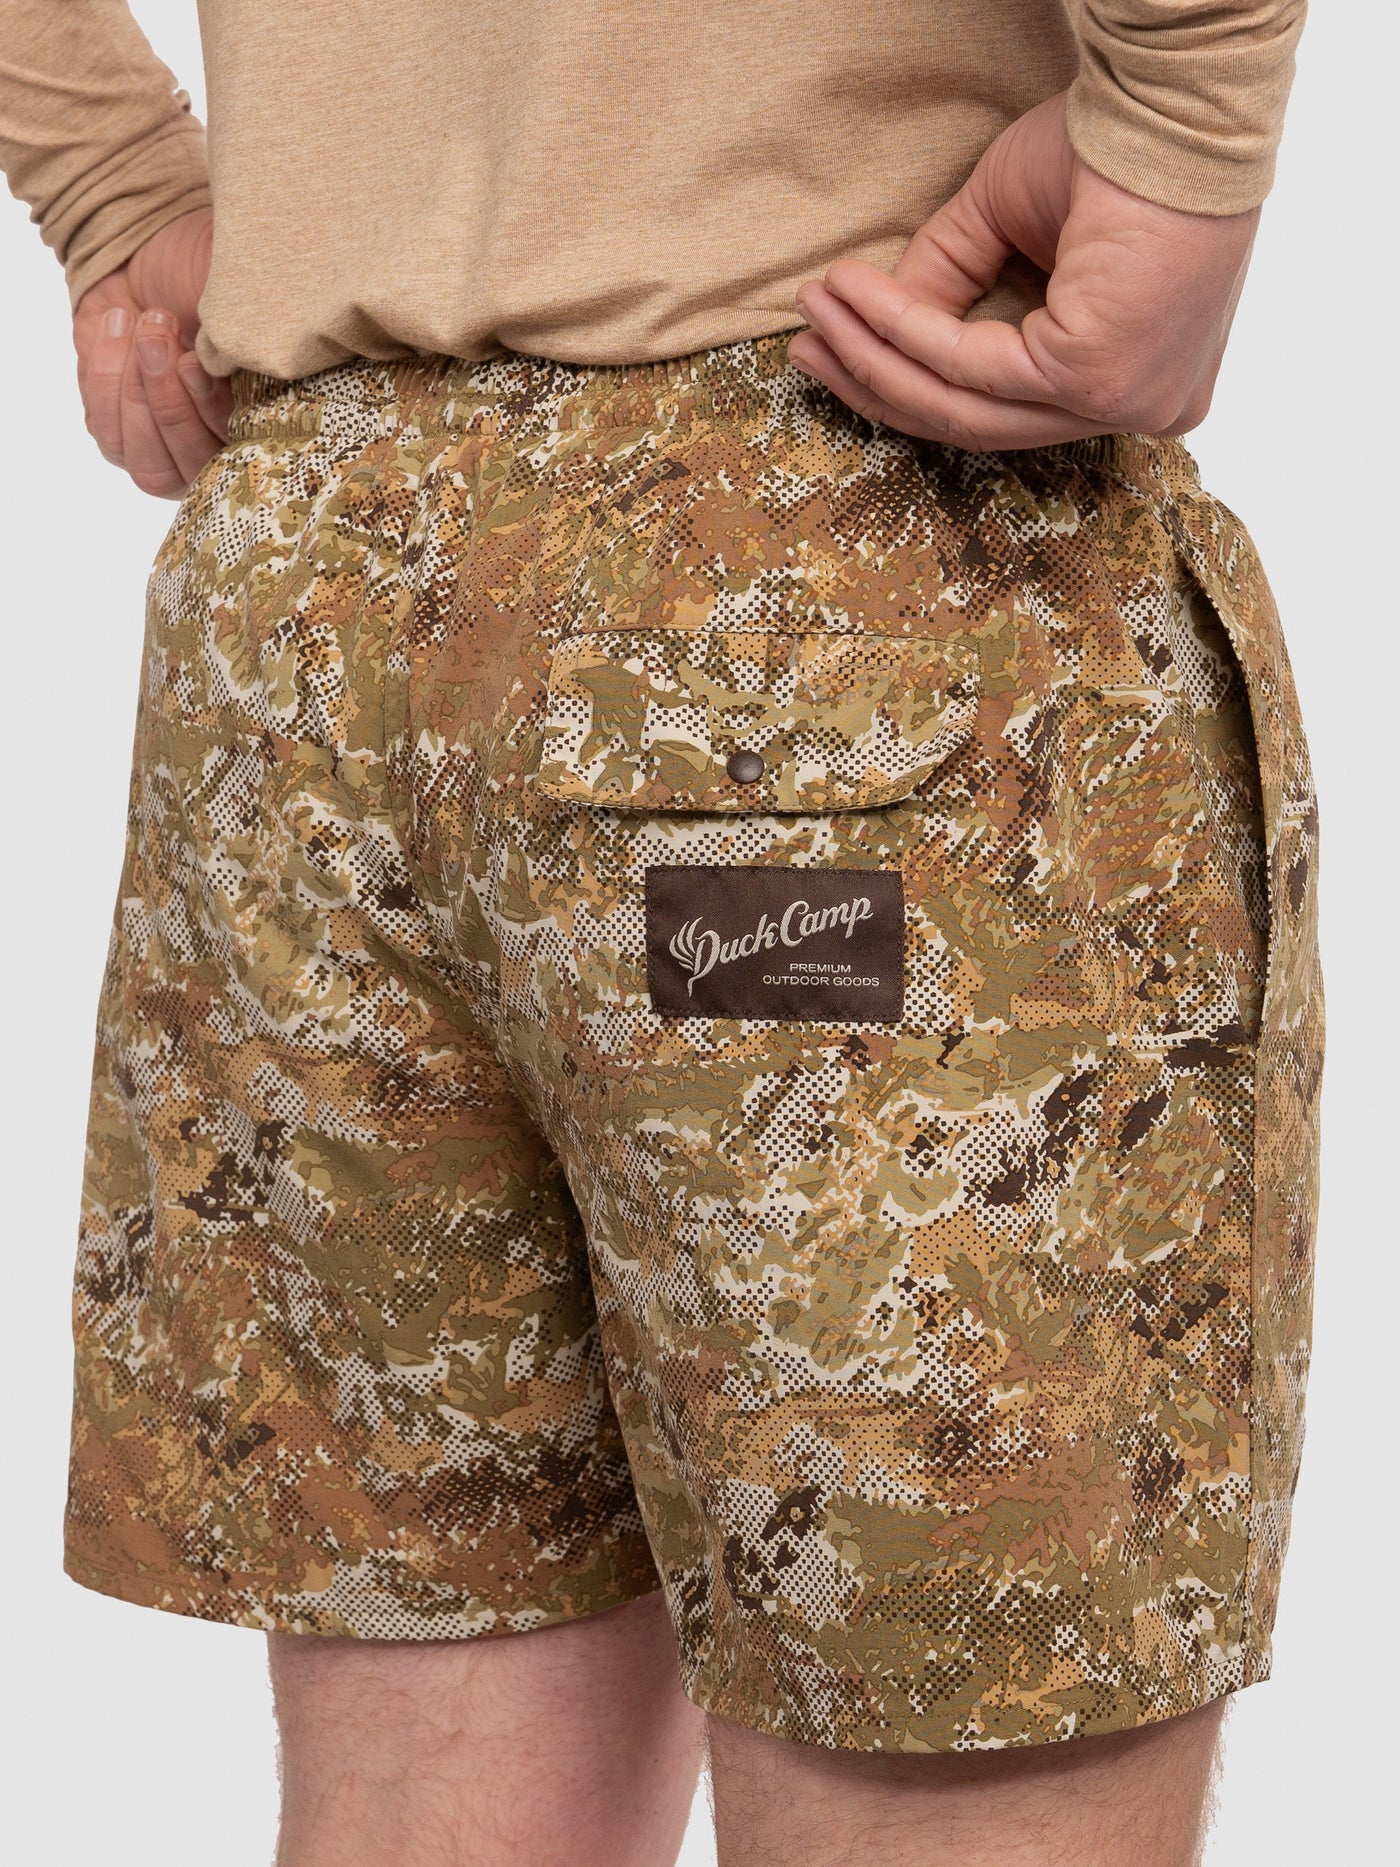 Duck Camp Scout Shorts 5, Midland 2.0 | Large